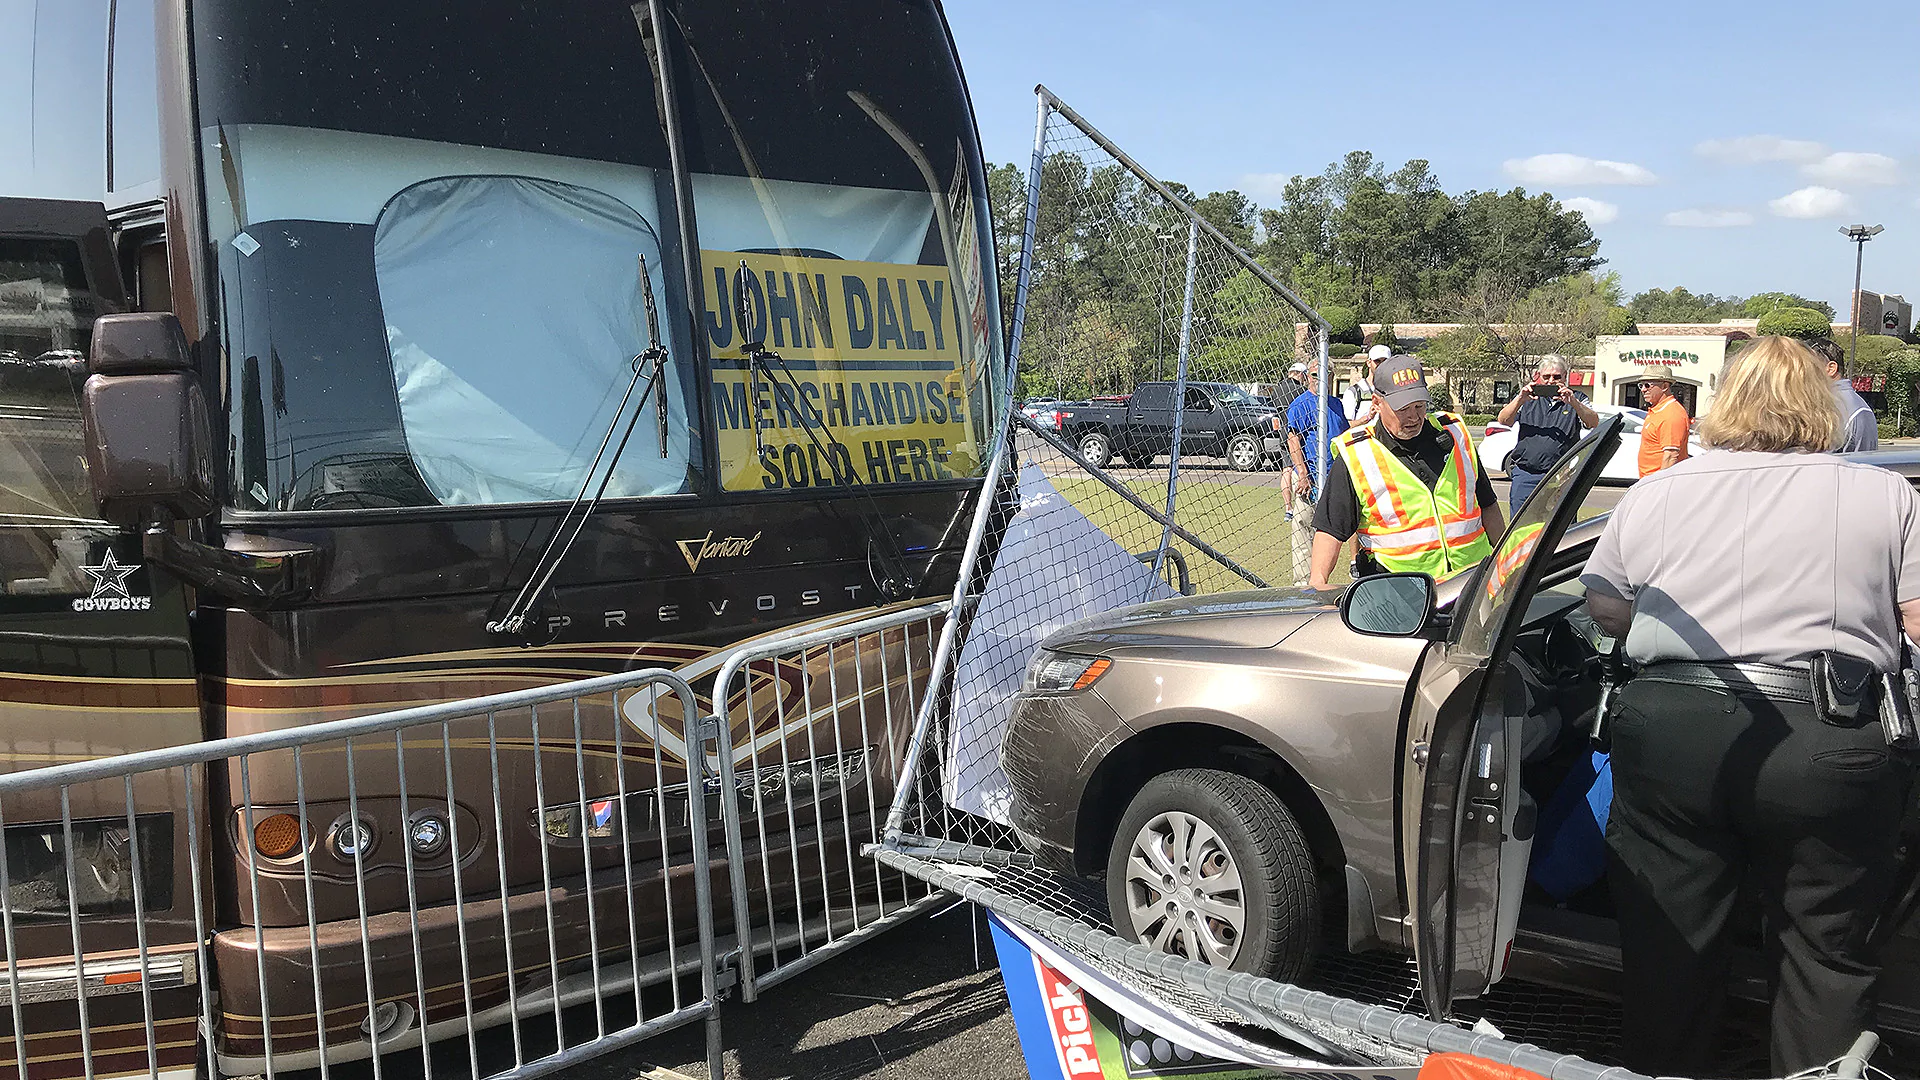 Car crashes into Daly's bus in Augusta parking lot